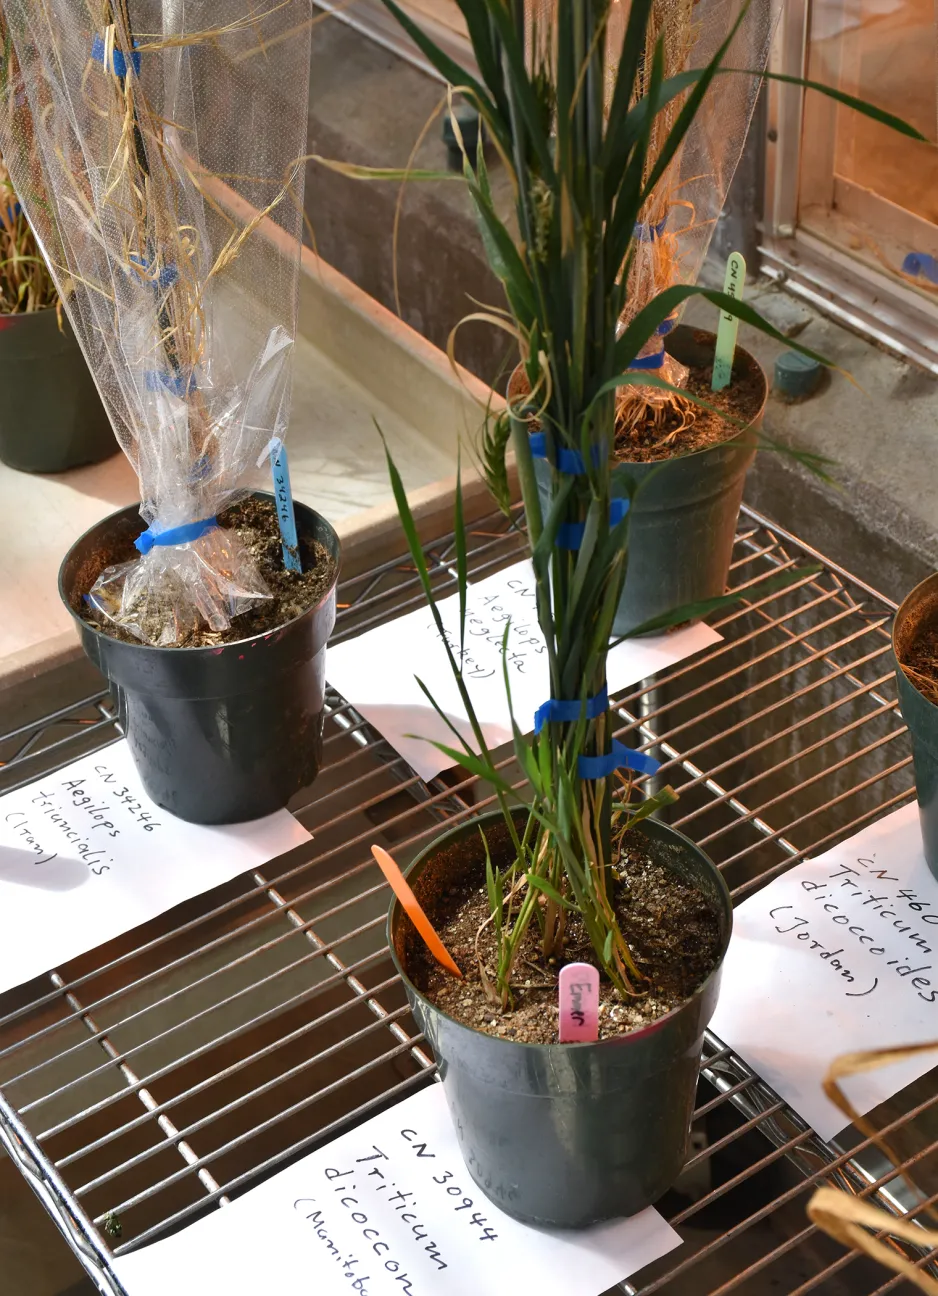 A photo of small, potted plants on a metal rack. The focus is on the sheets of paper each pot rests on, indicating in handwriting the species, and location of the plant’s origin.